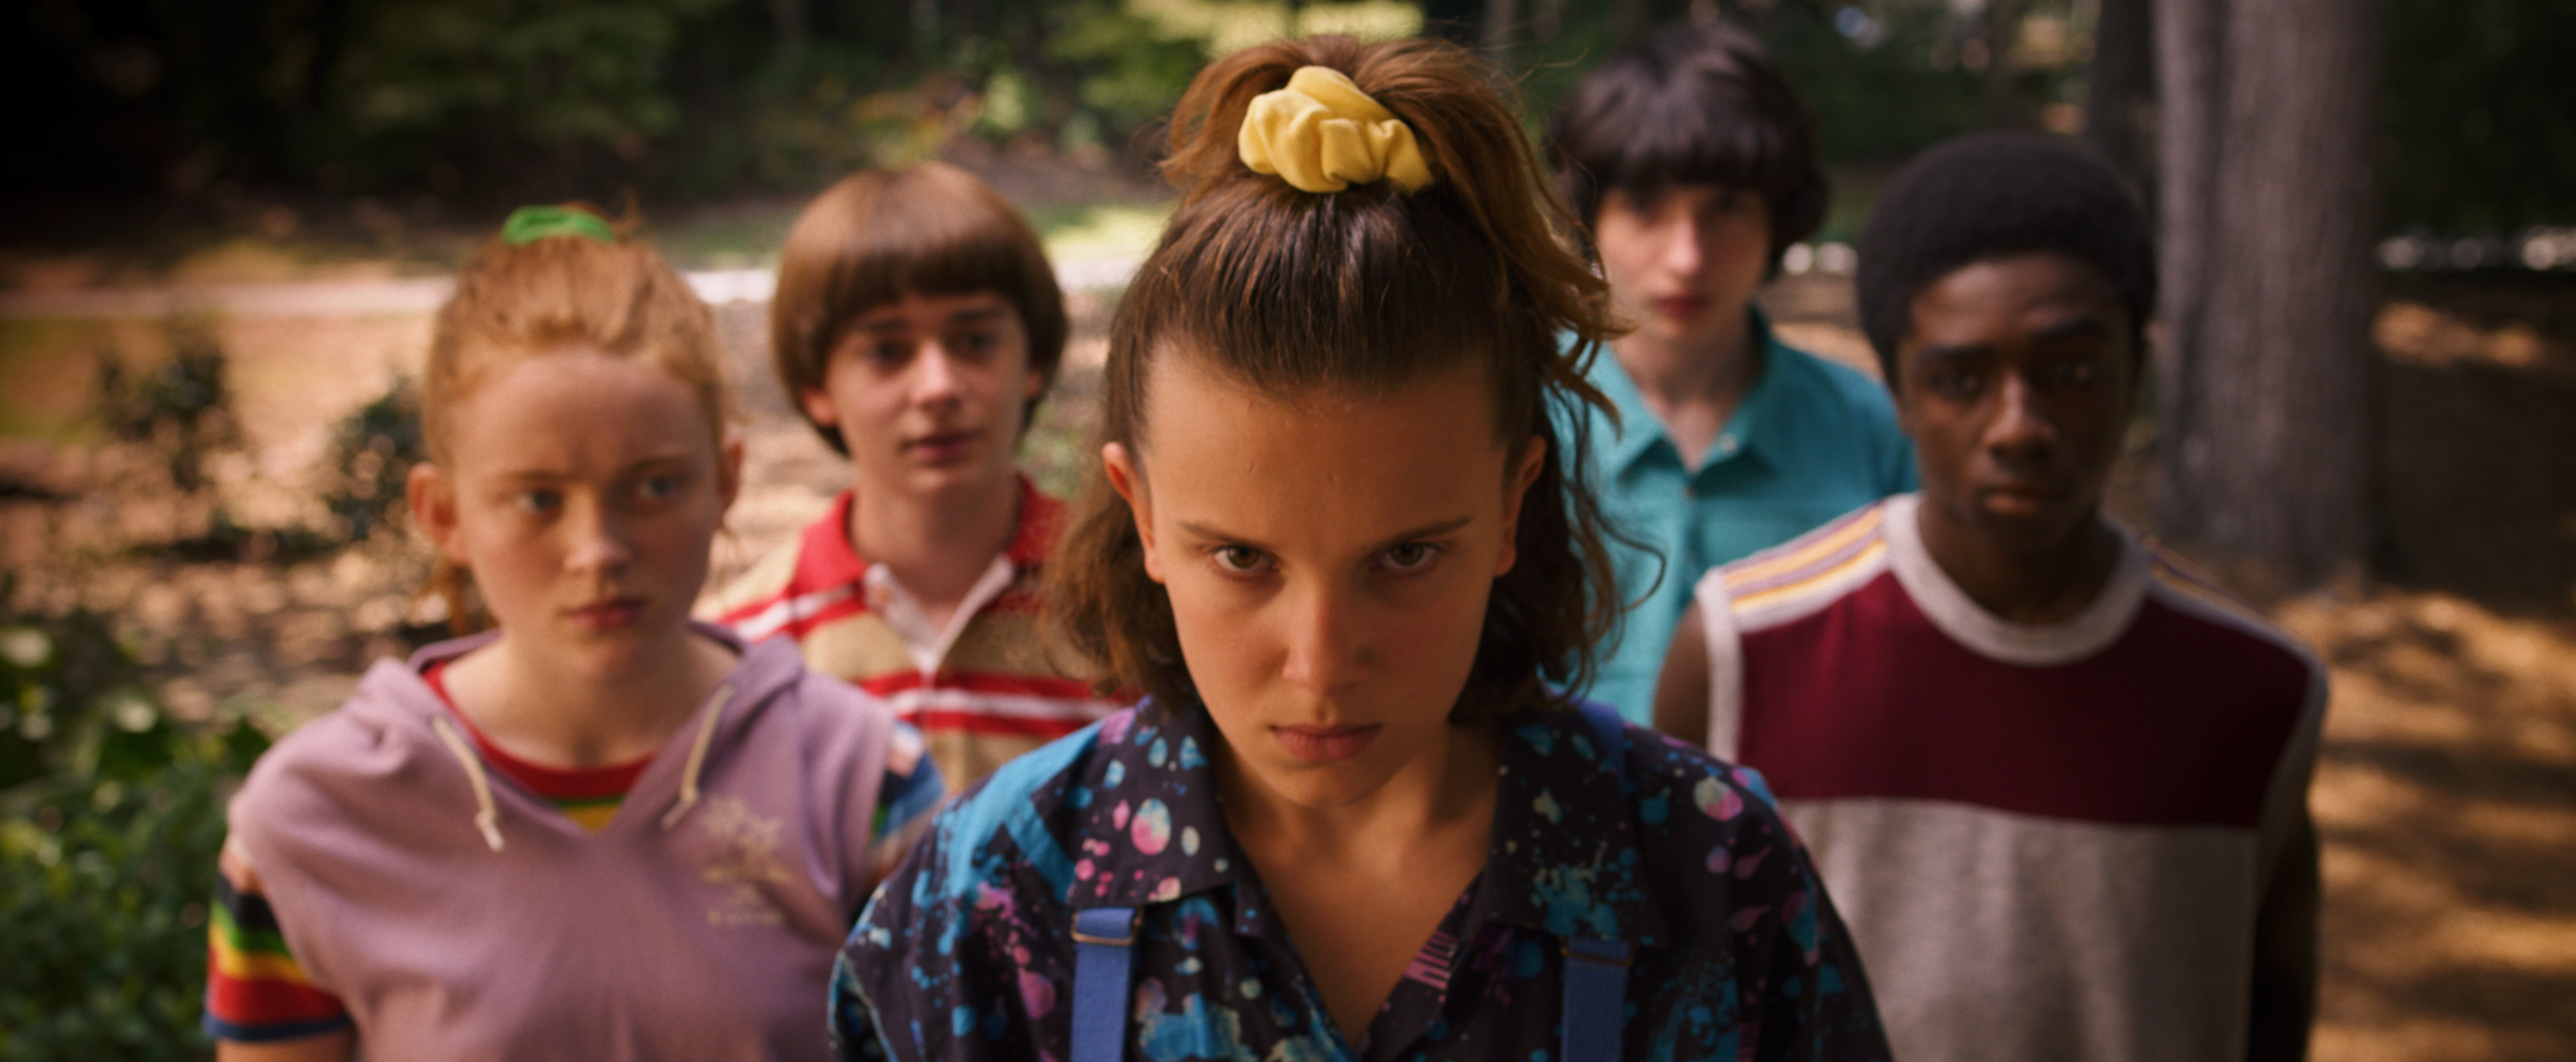 Can Stranger Things help put Netflix back on track?